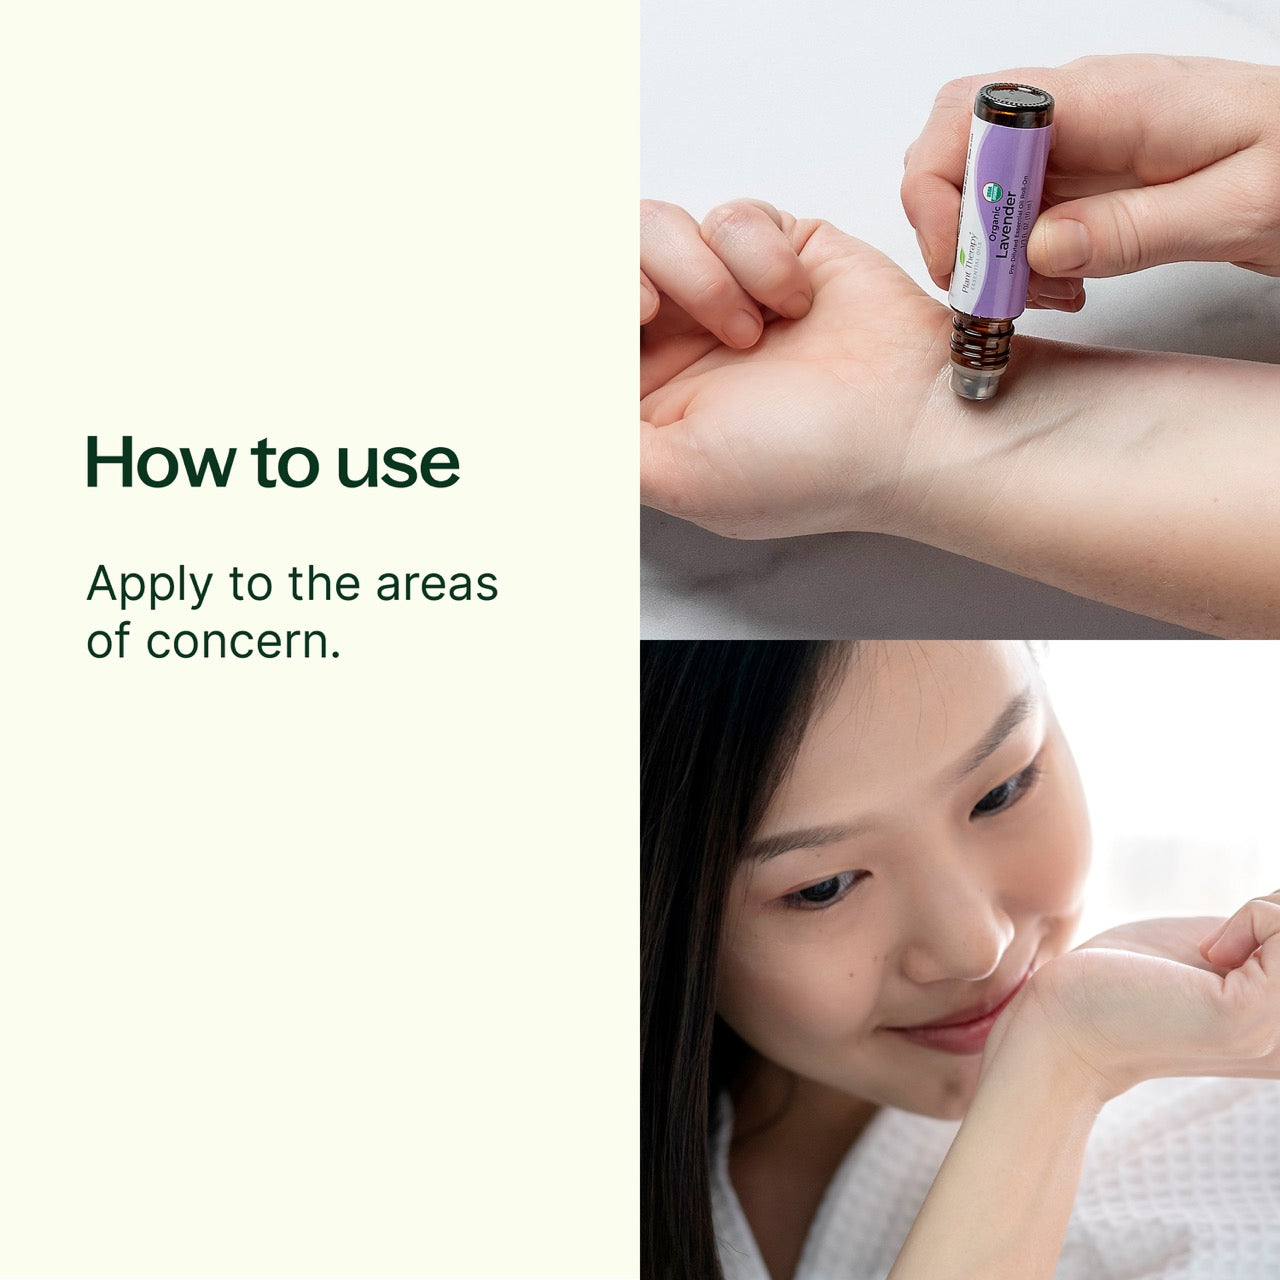 How to Use Frankincense Carterii Essential Oil Pre-Diluted Roll-On: Apply to the areas of concern